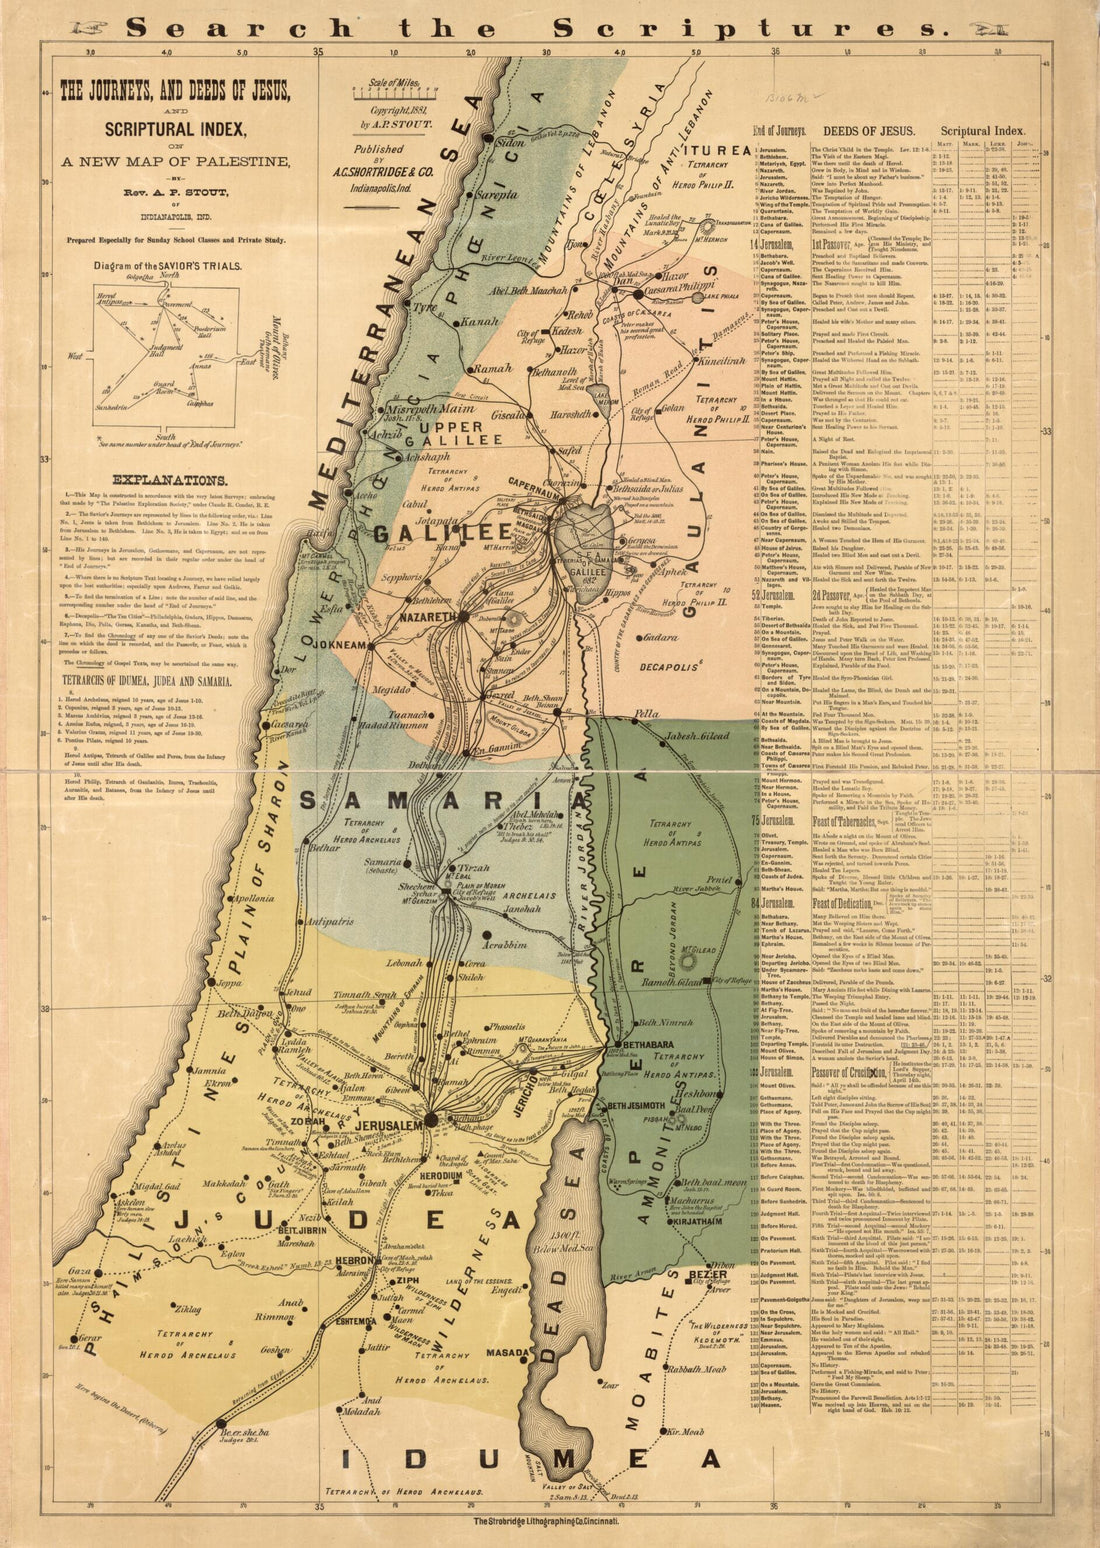 This old map of The Journeys, and Deeds of Jesus, and Scriptoral Index On a New Map of Palestine from 1881 was created by Andrew Pearce Stout in 1881